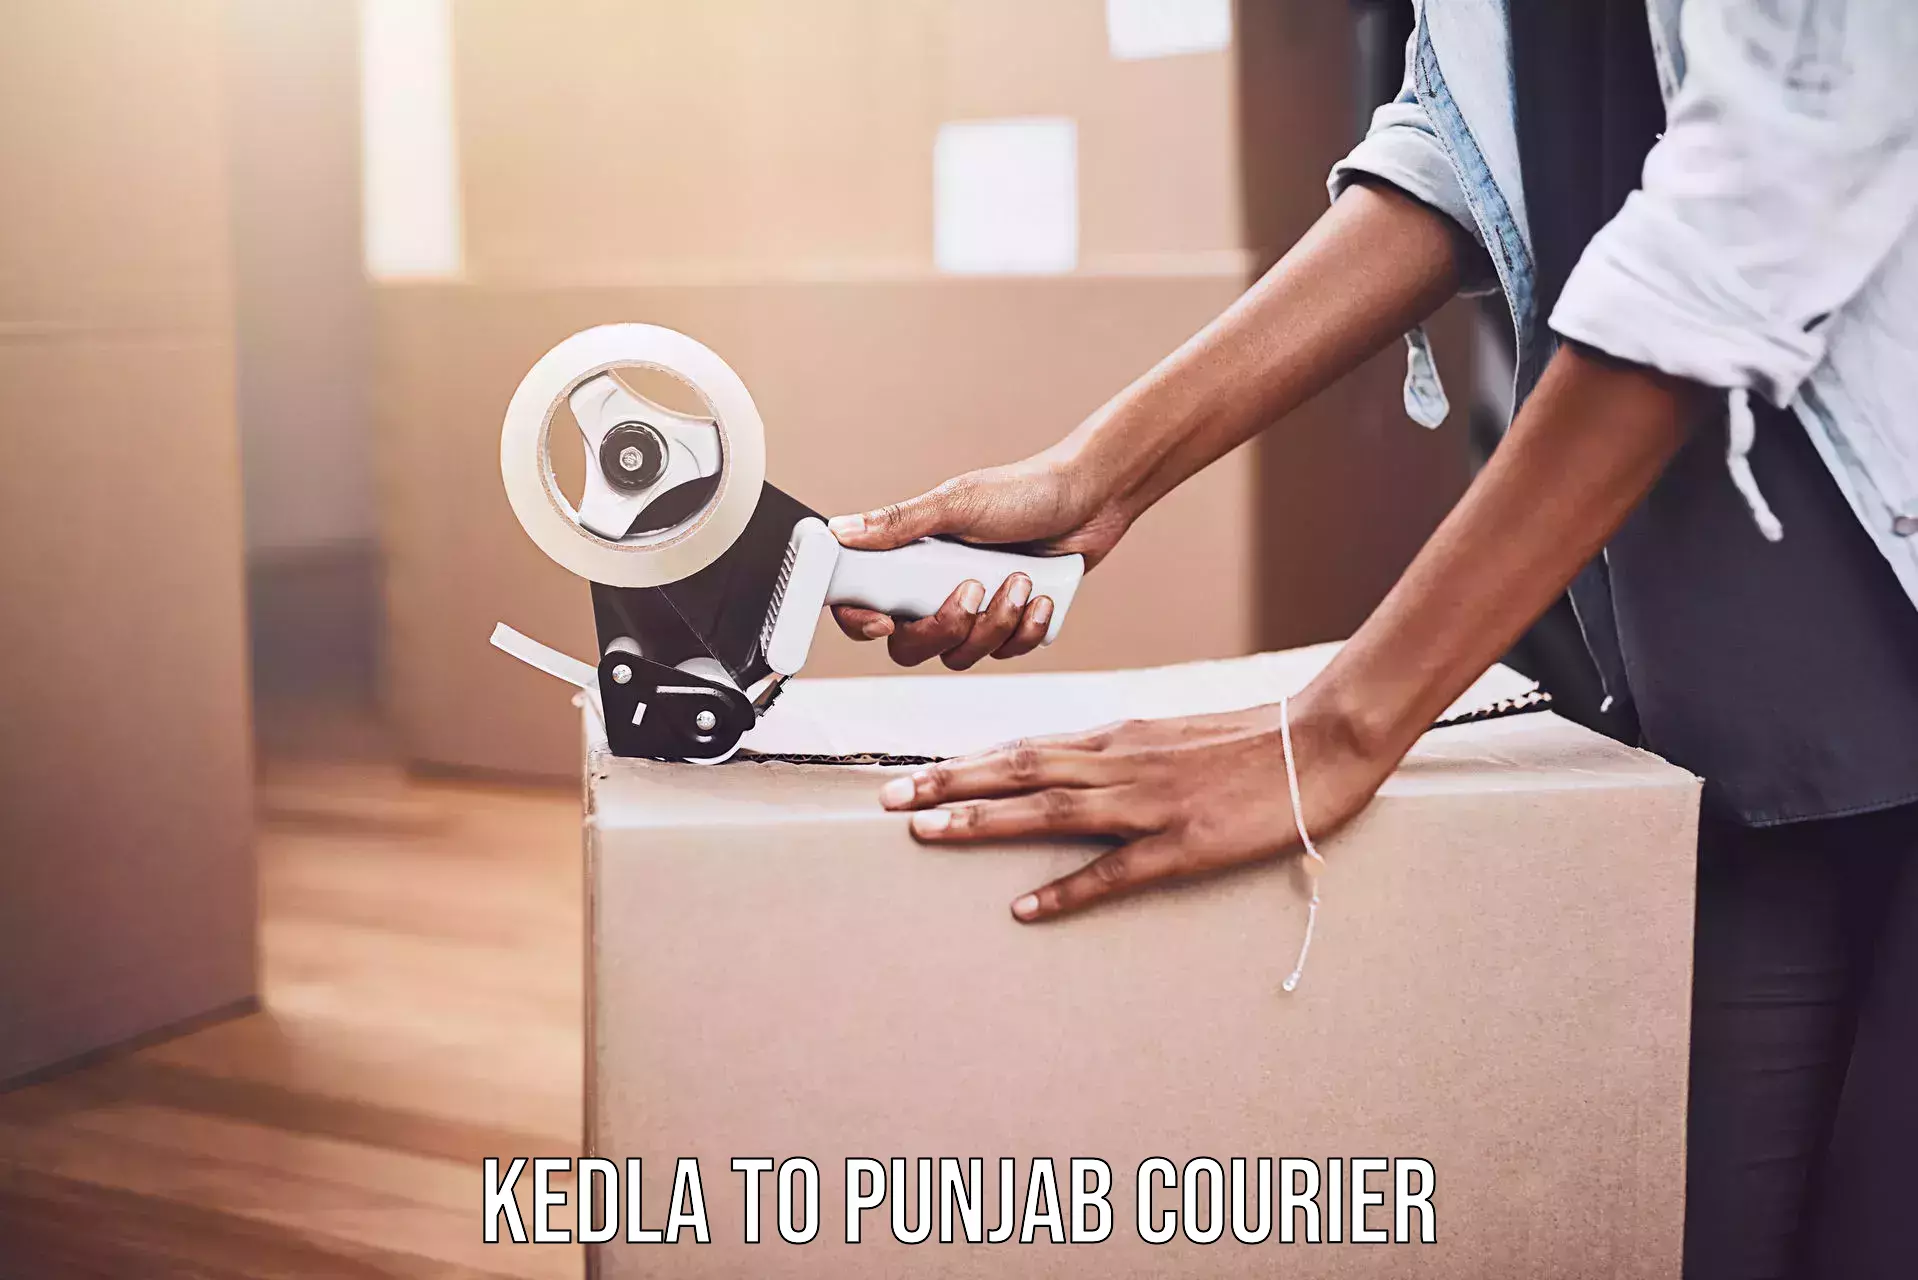 Personal courier services Kedla to Malerkotla